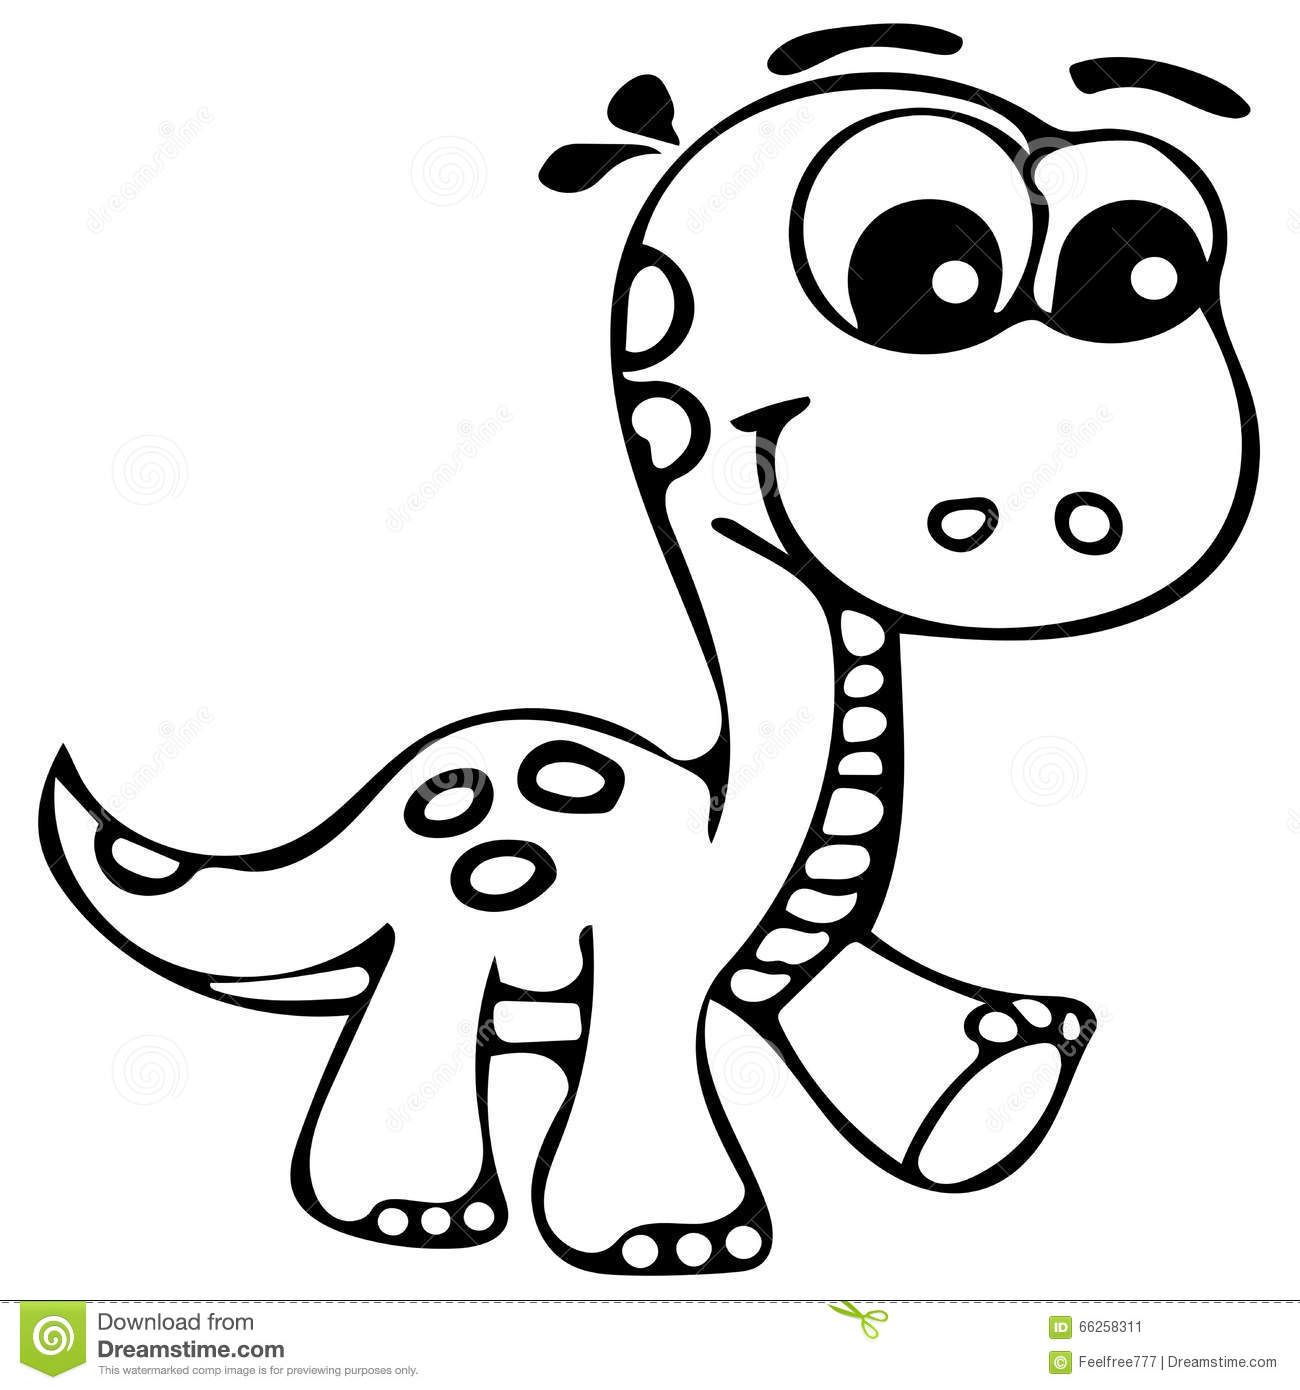 Cute Dinosaur Coloring Pages   Coloring Home